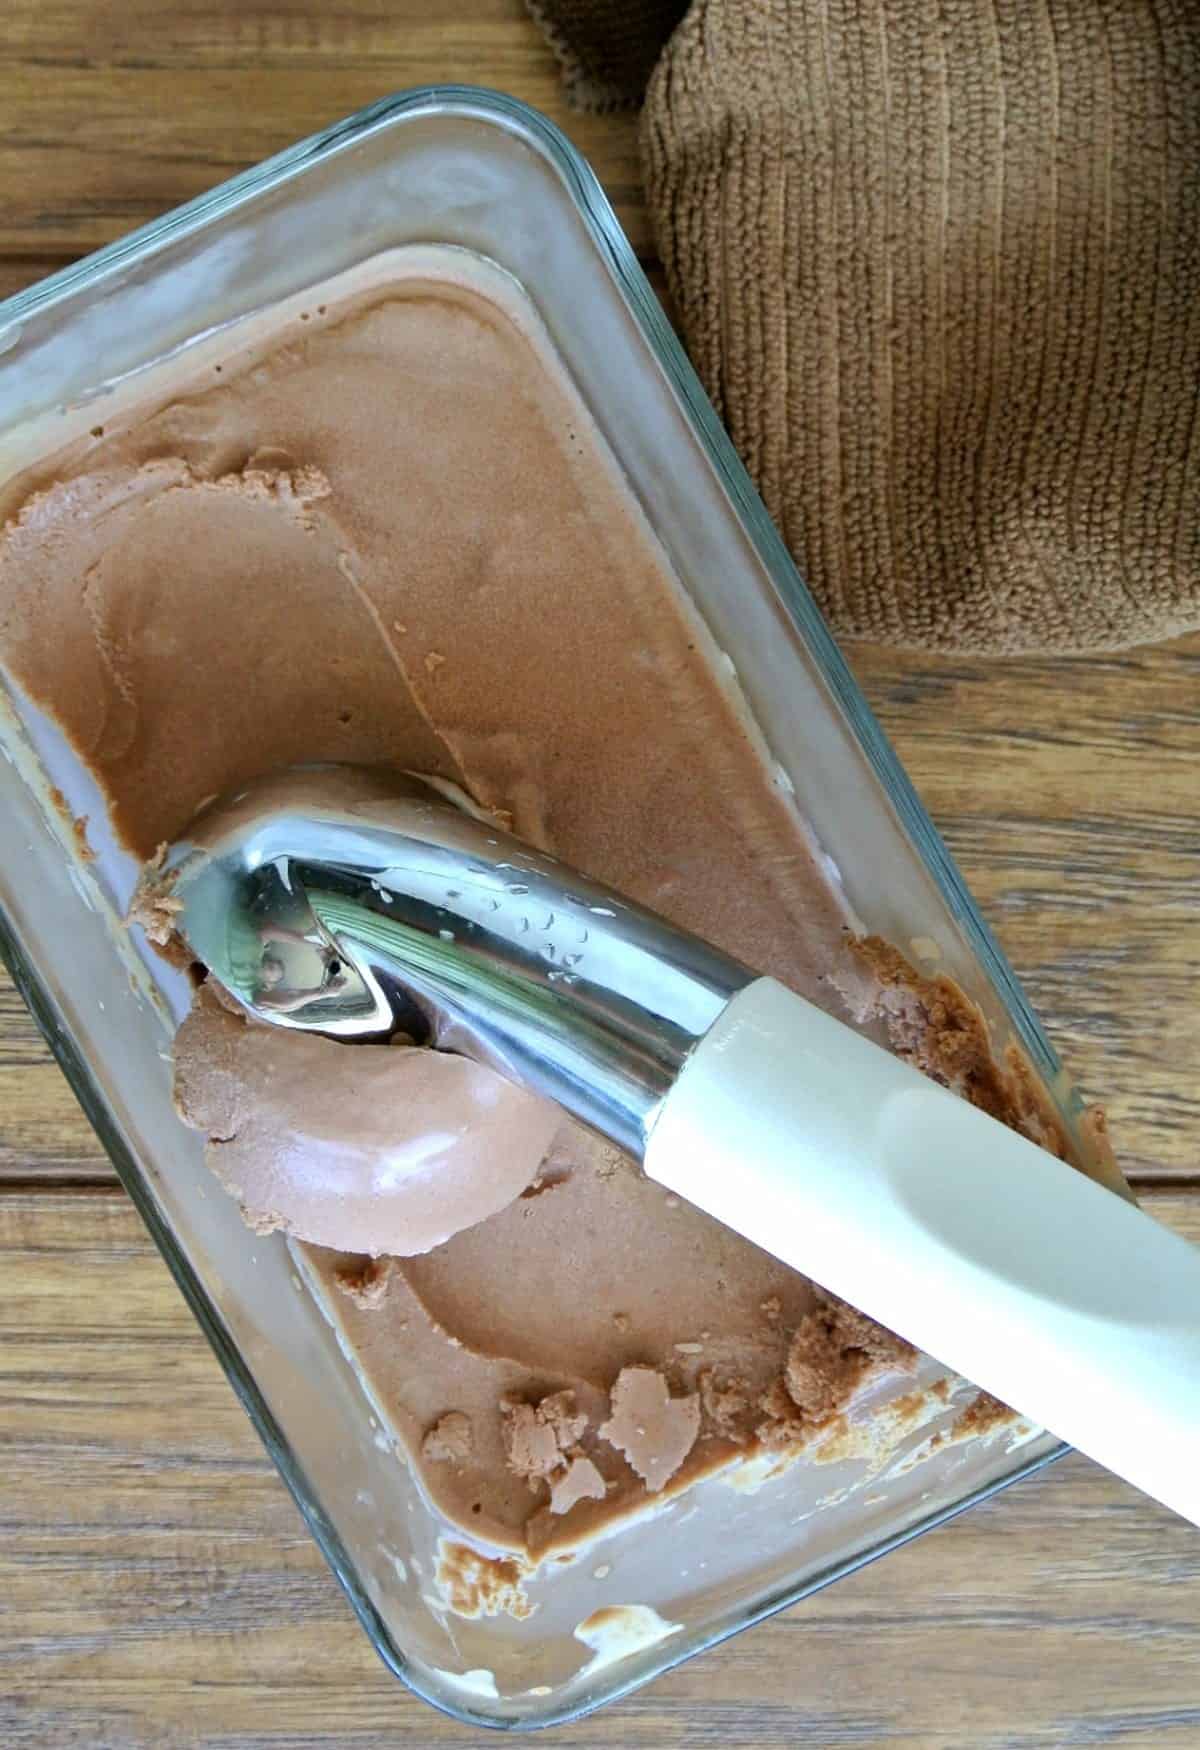 Stainless Steel ice cream scoop is scooping up a big serving of chocolate out of a glass container.